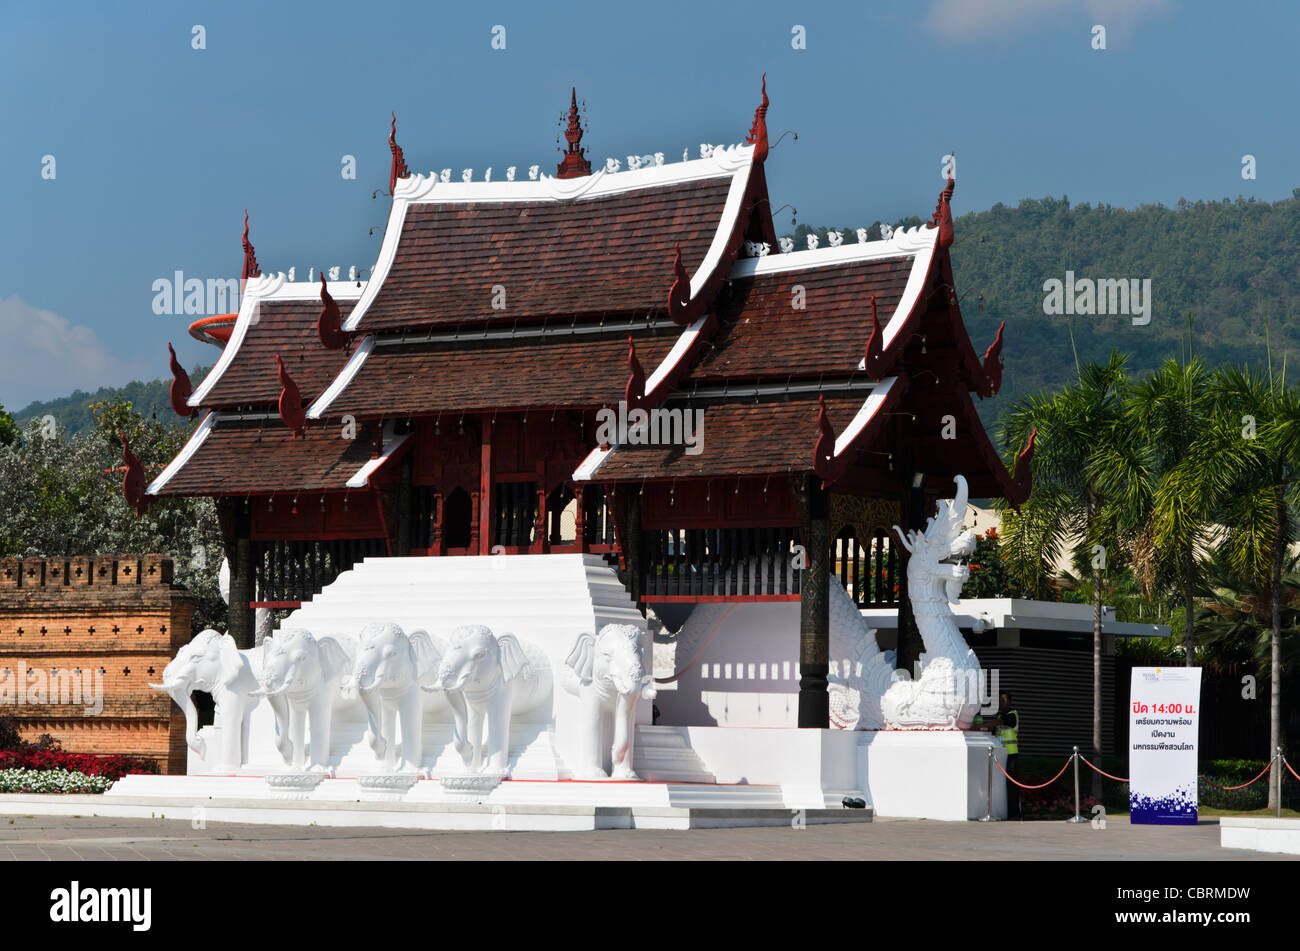 Thai Buddhist temple style building with white elephant statues by ...